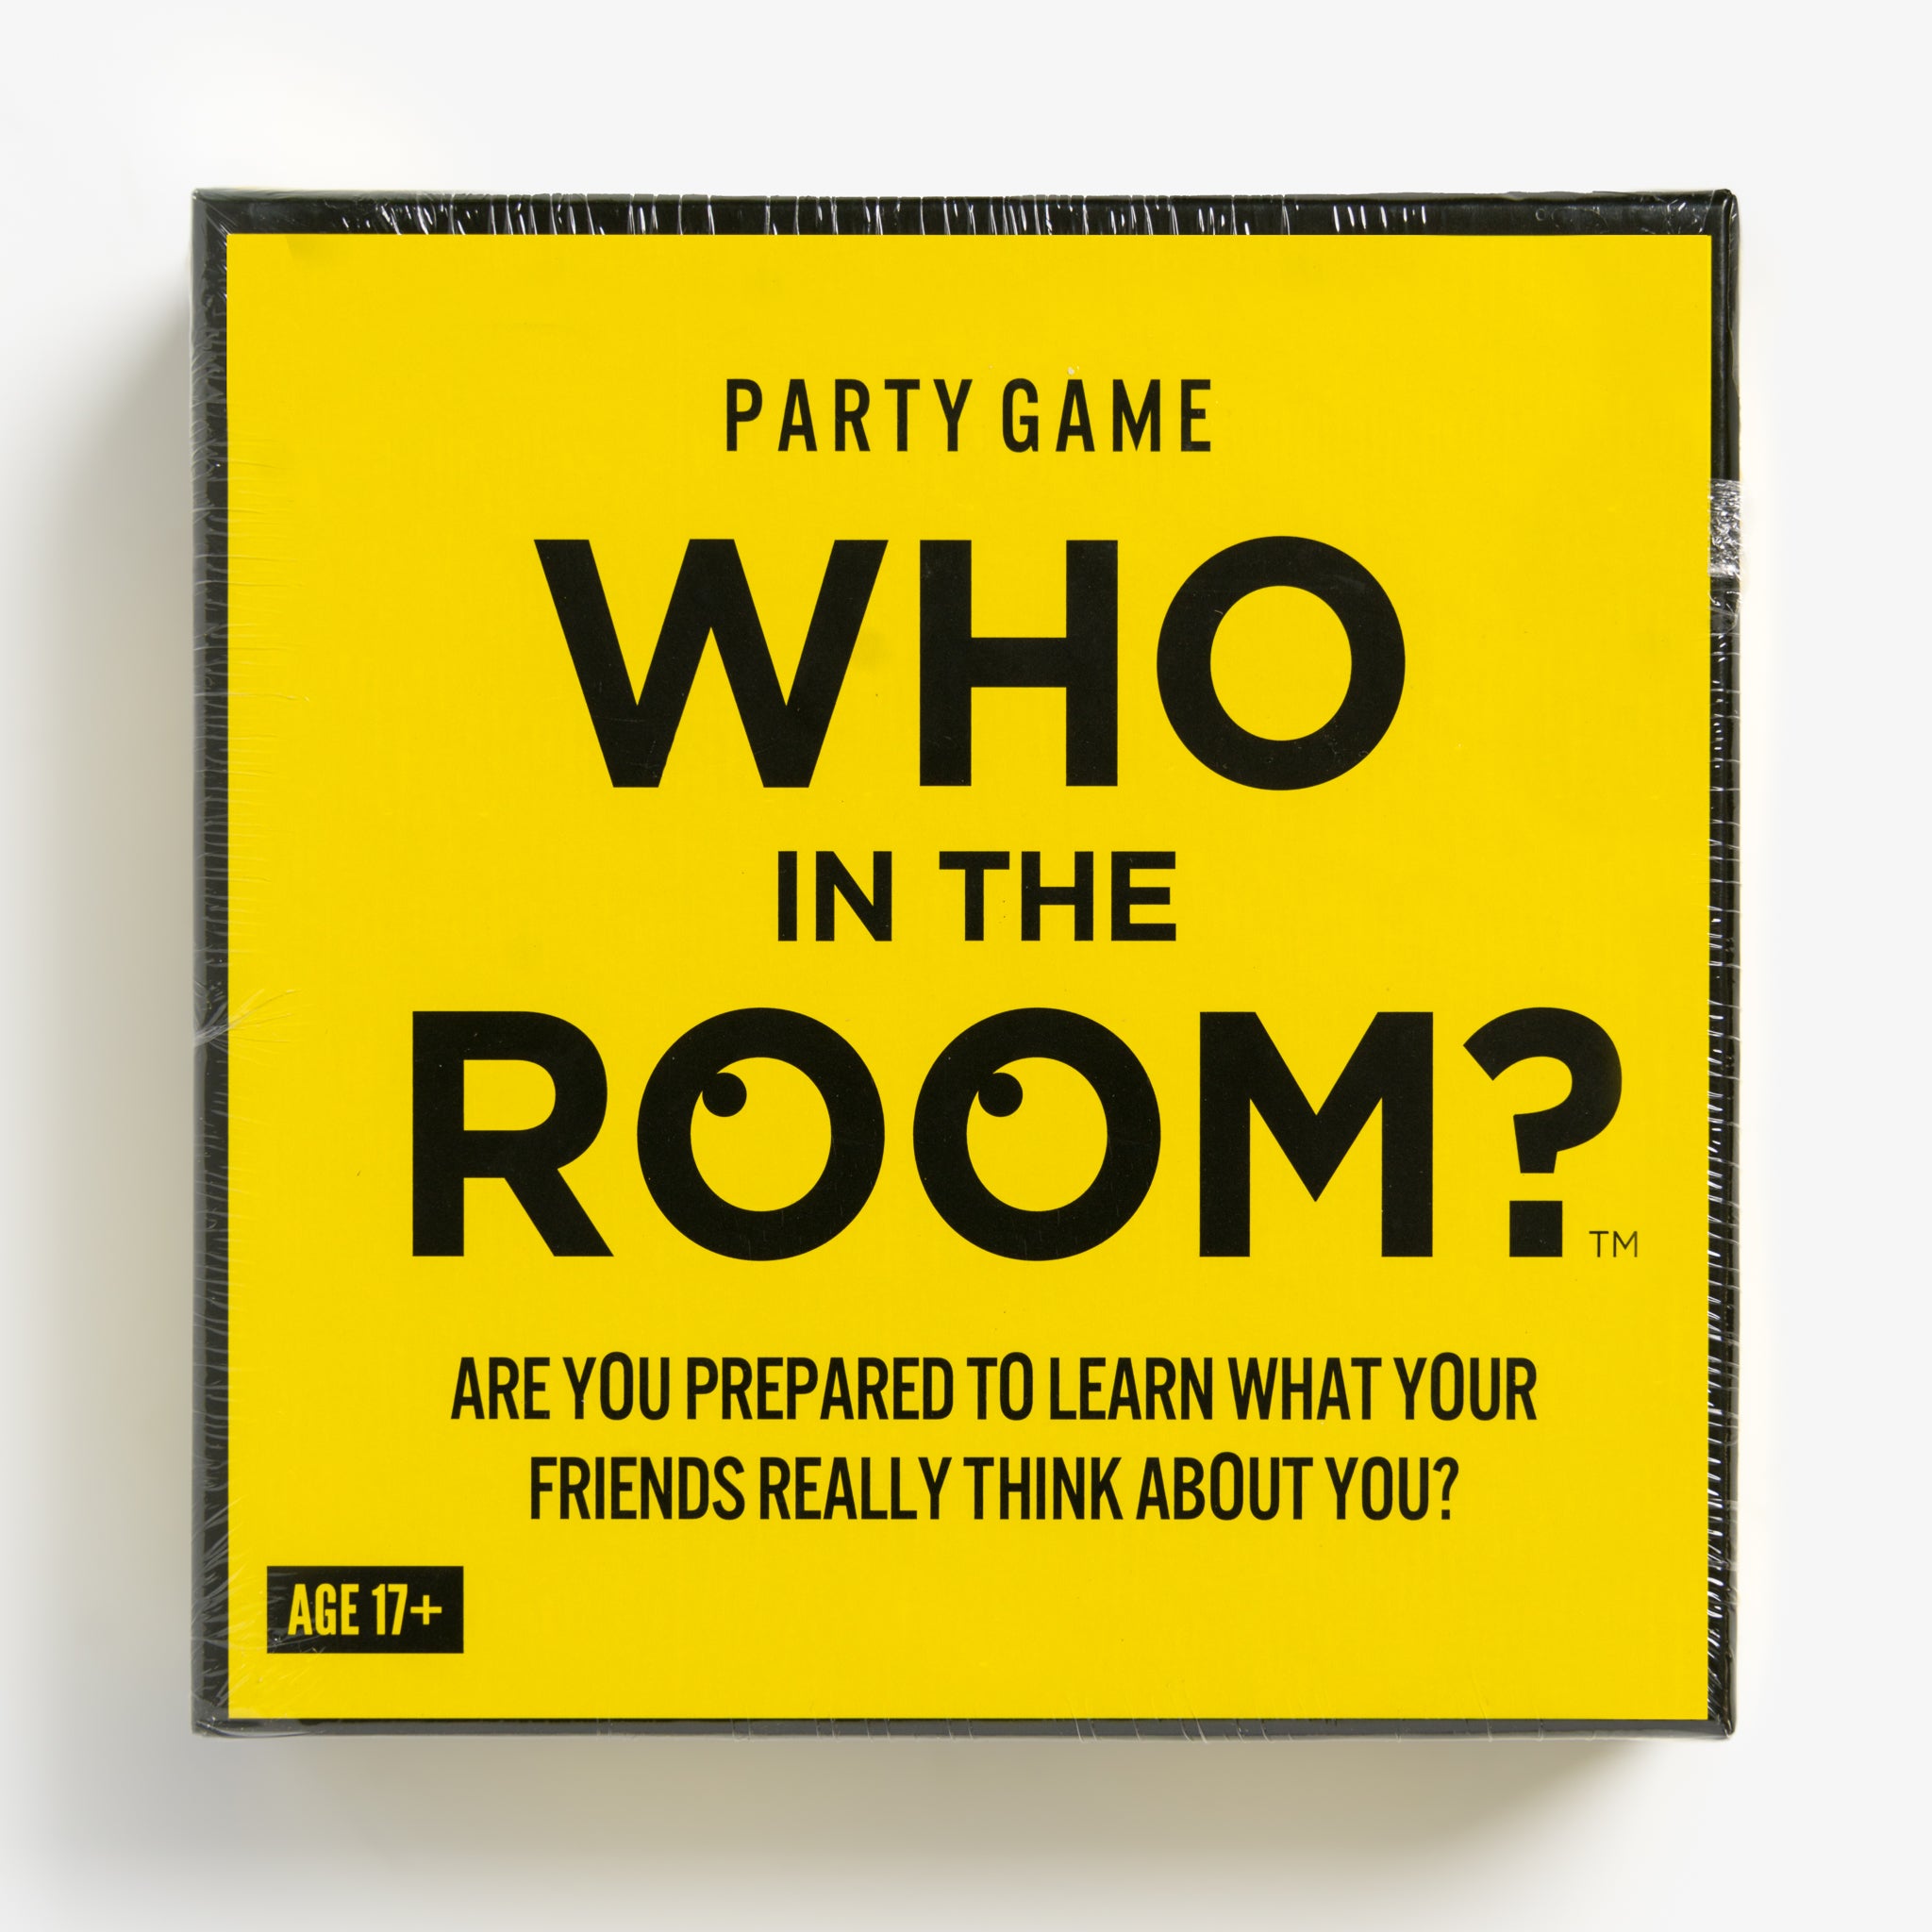 Who In The Room? Game